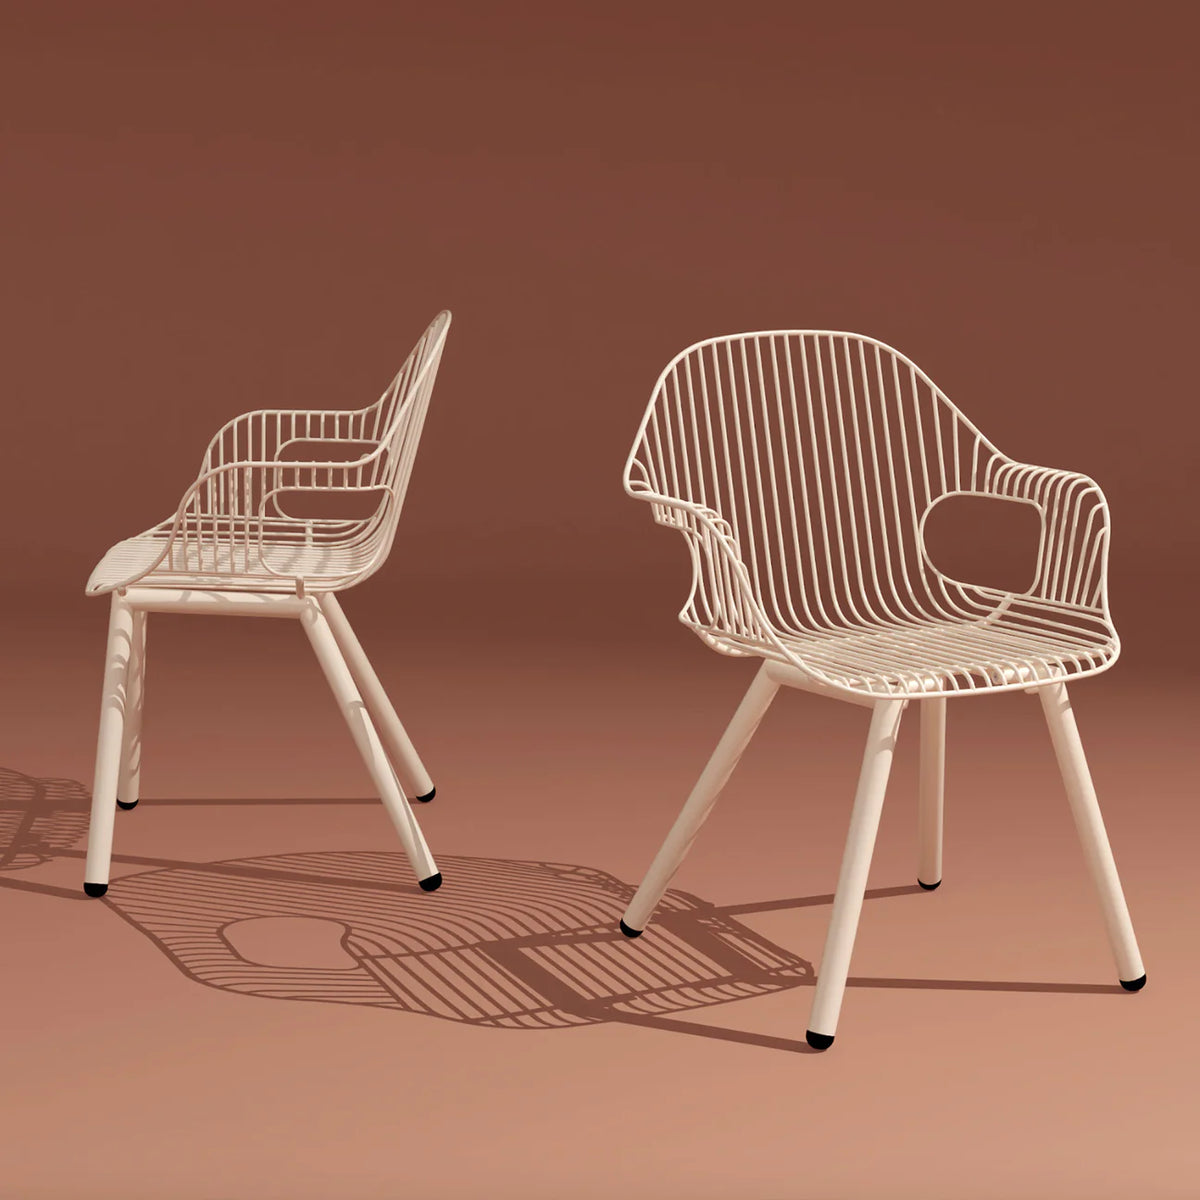 Rita Chair by Bend Goods (Made in the USA)